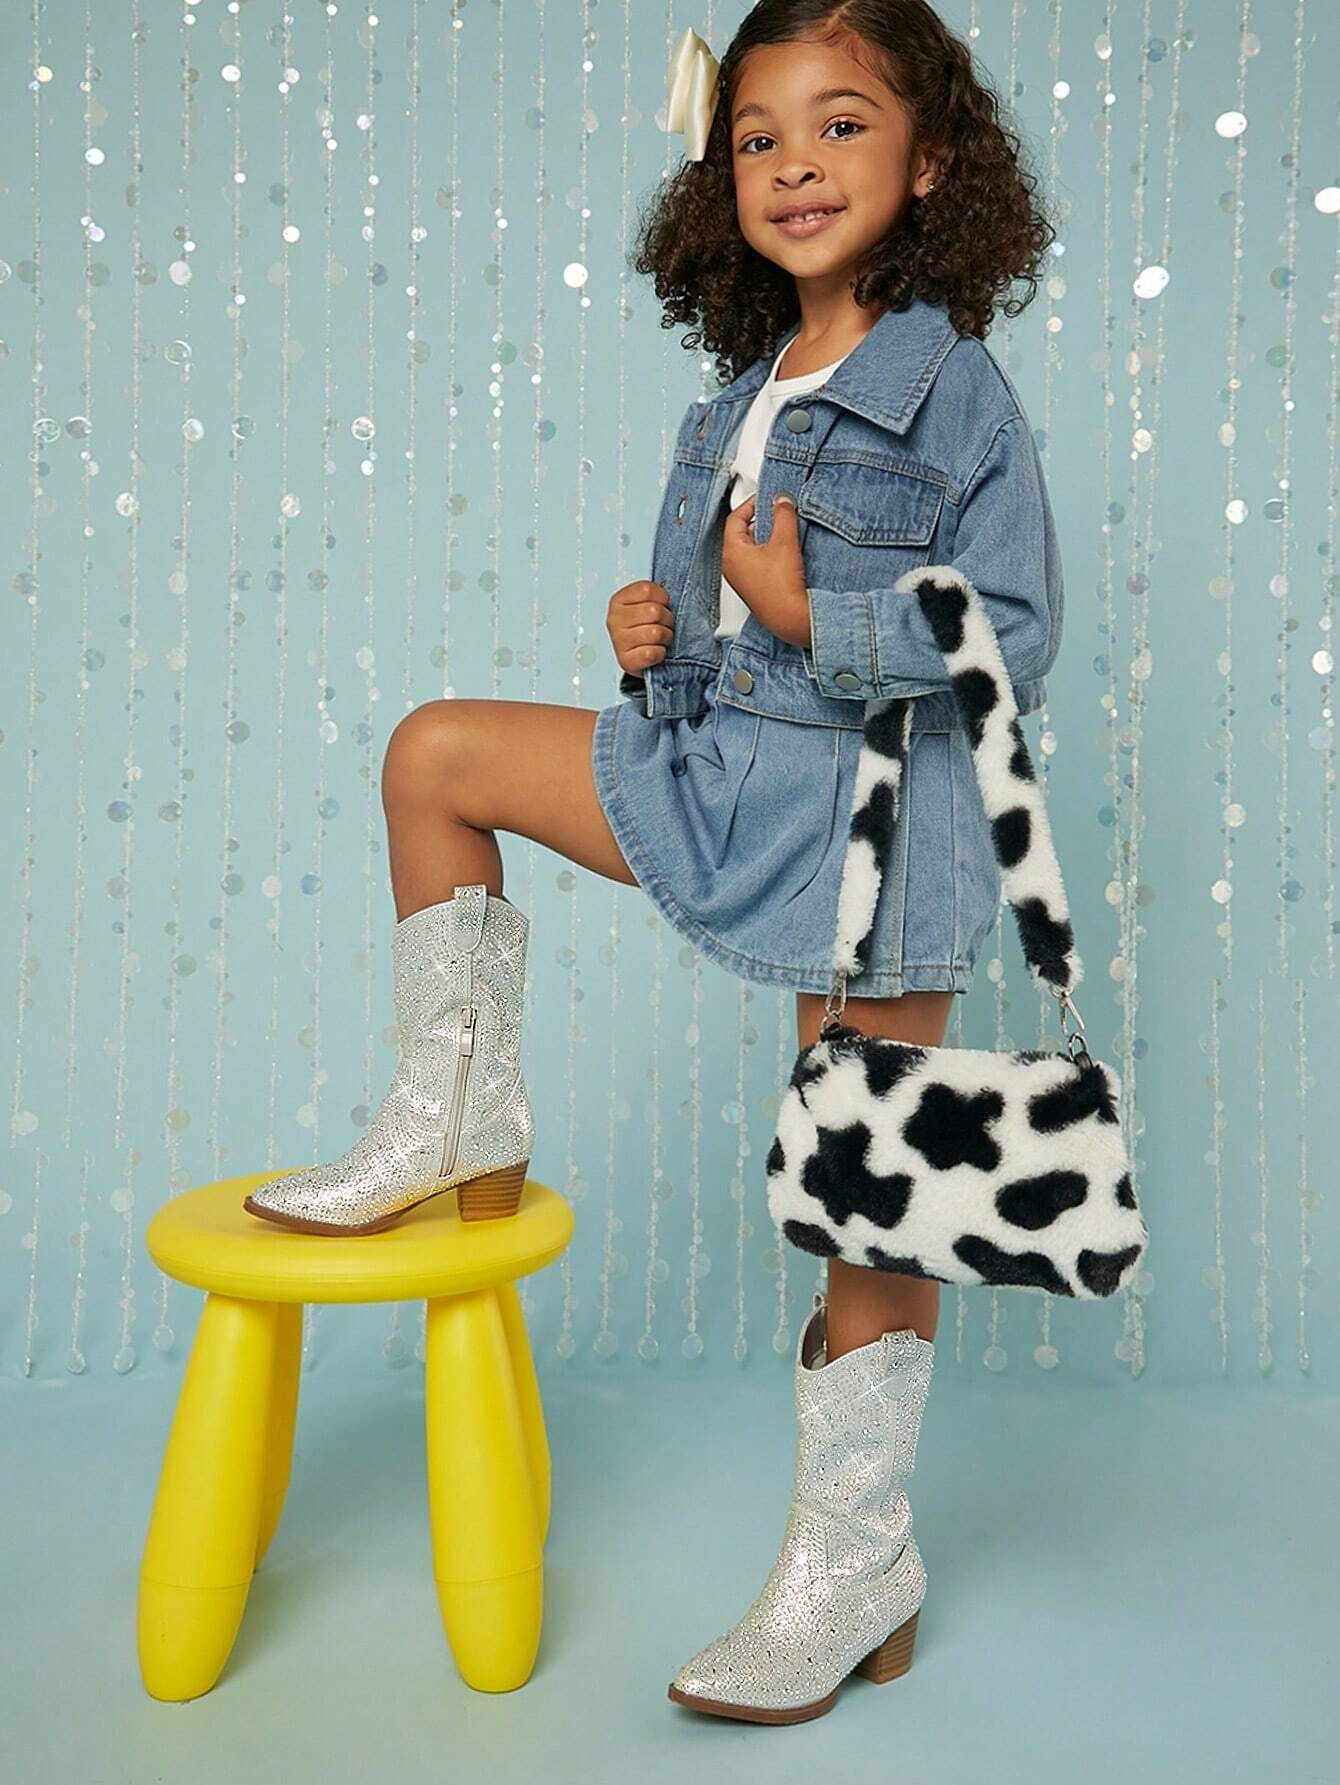 Girls Artificial Leather Mid-Calf Cowboy Boots | SHEIN